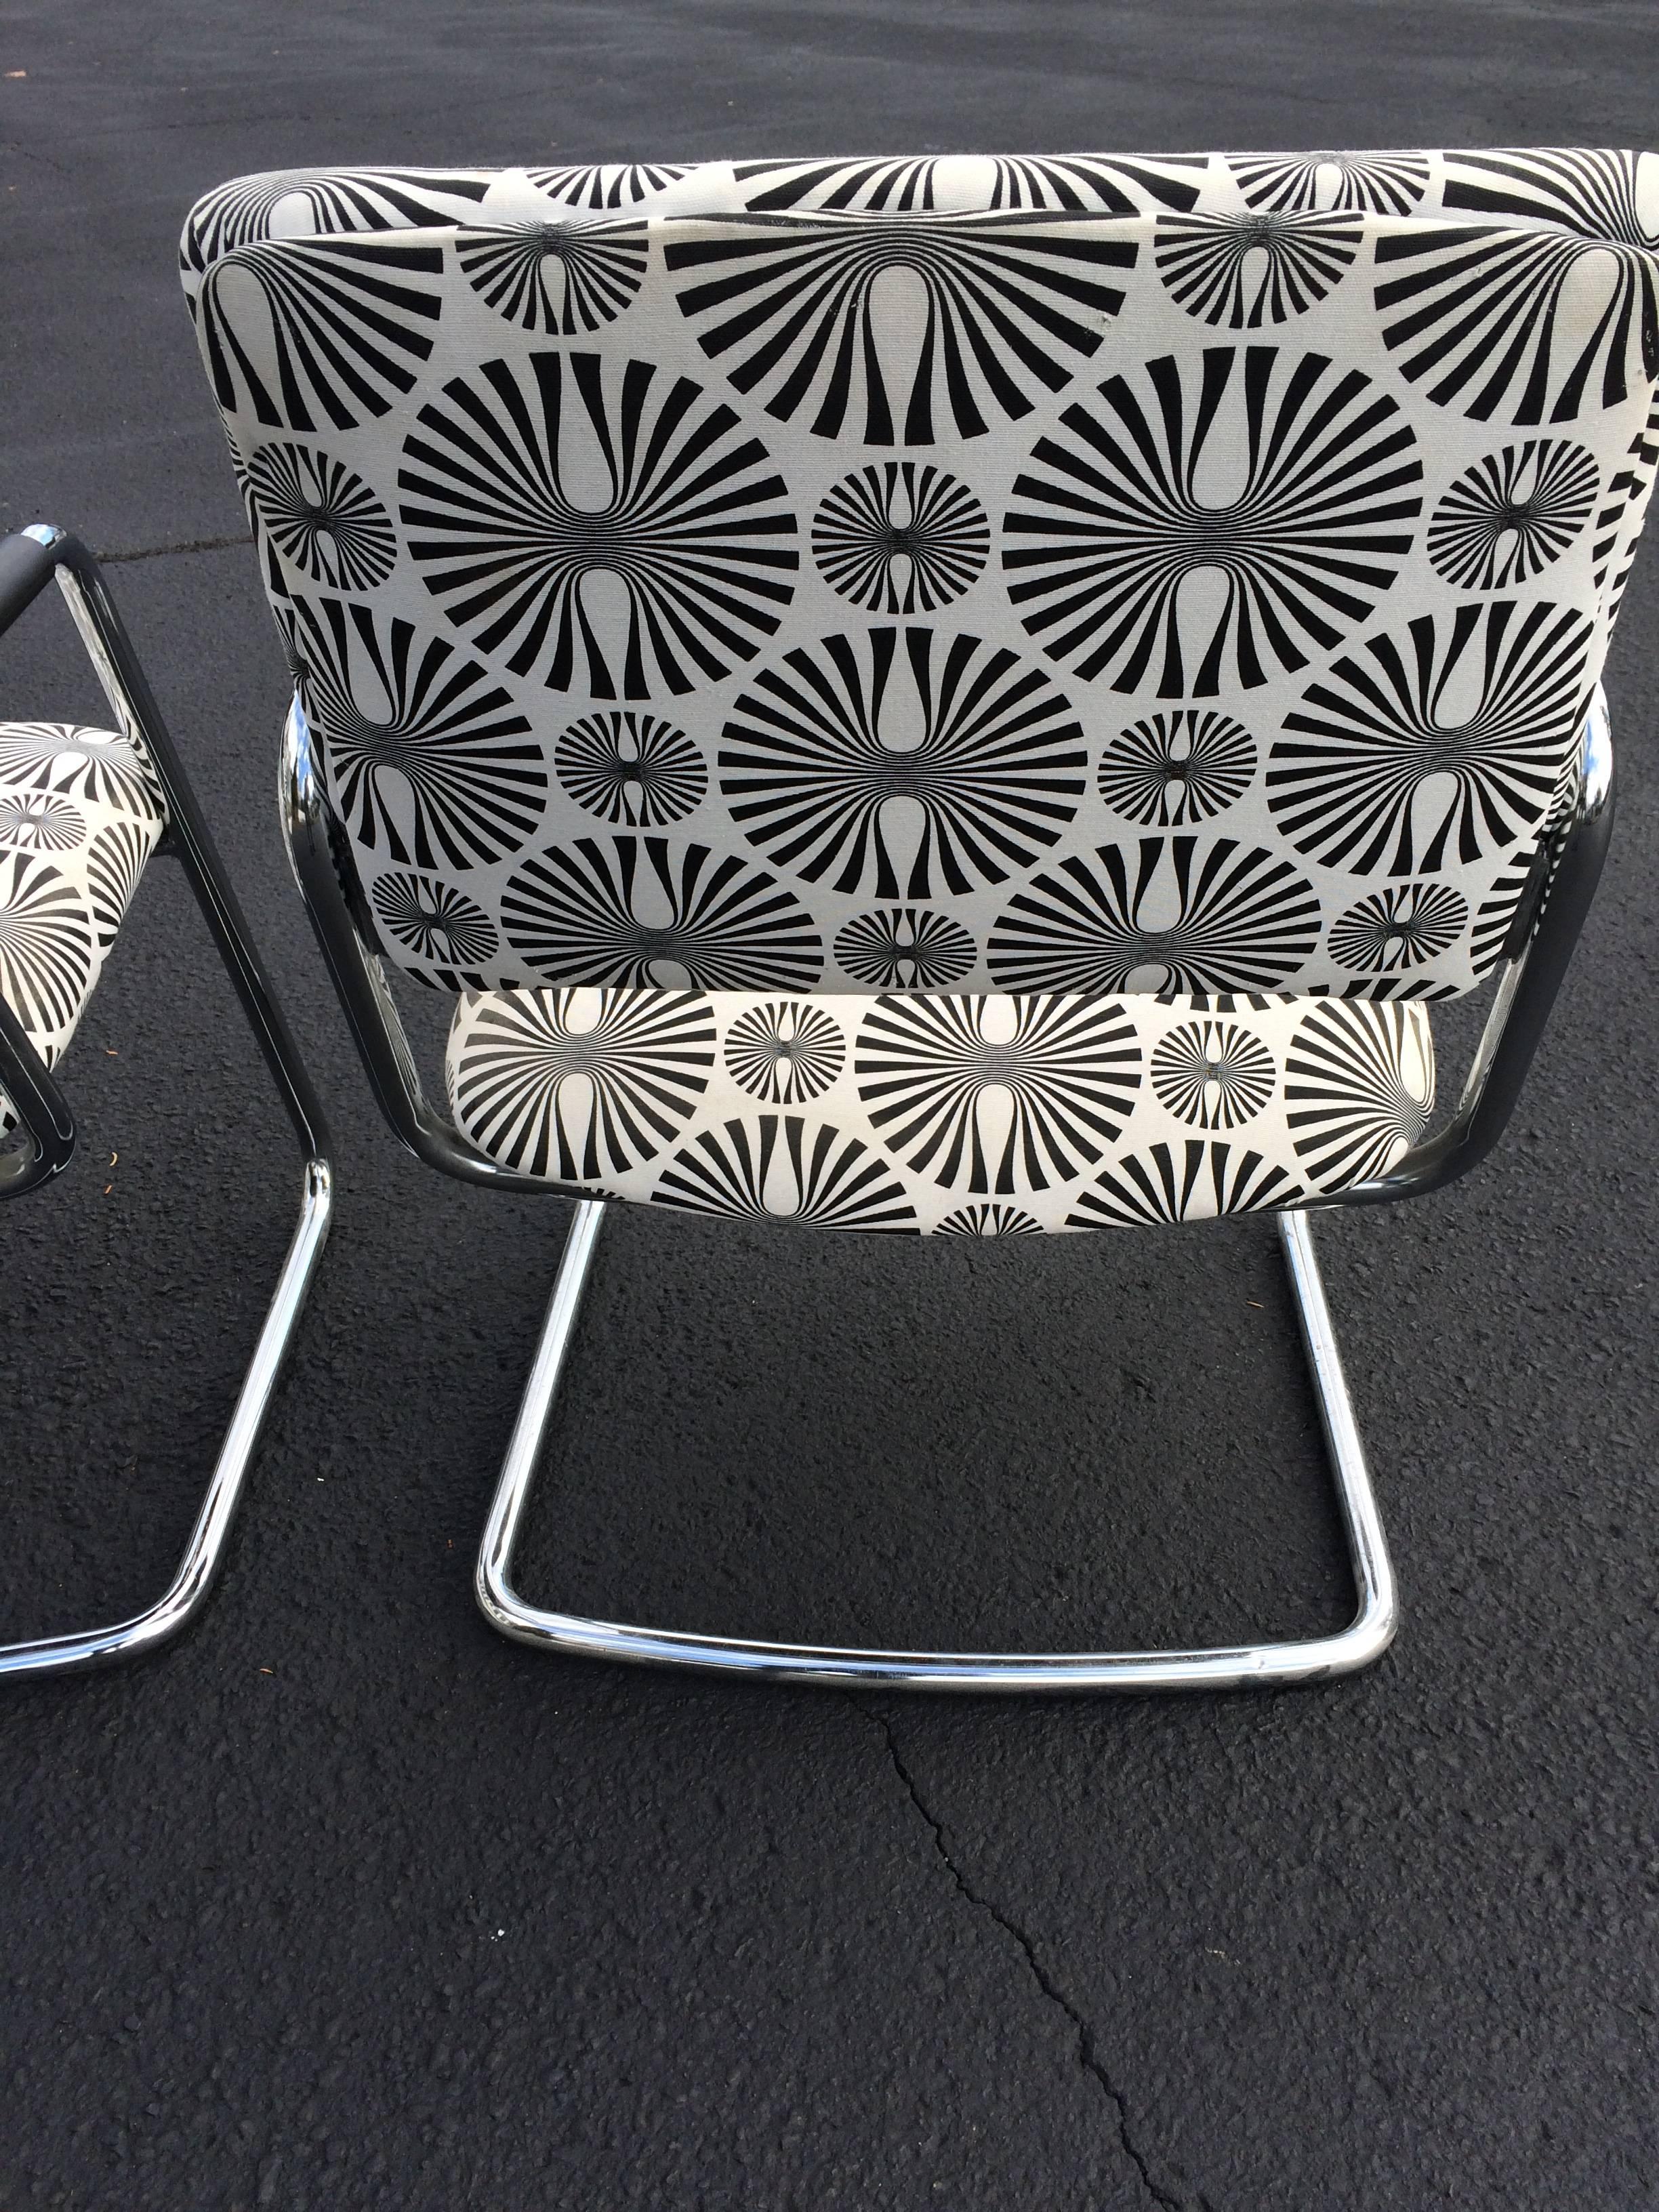 Pair of Mid-Century Optical Art Chairs in Black and White 2